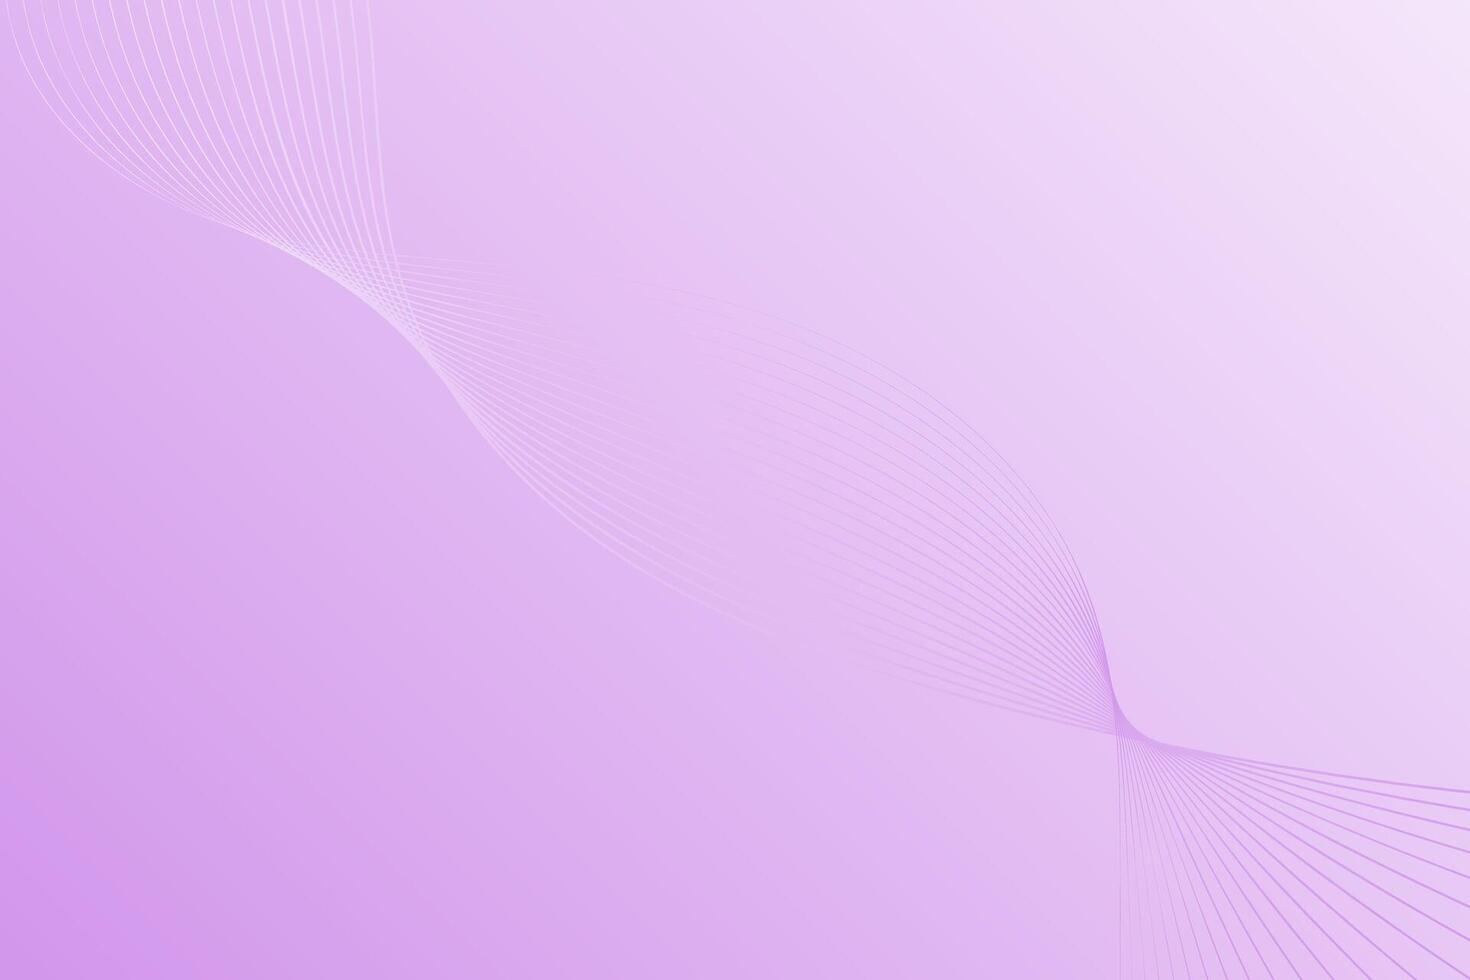 Vibrant purple background filled with dynamic lines and curves vector